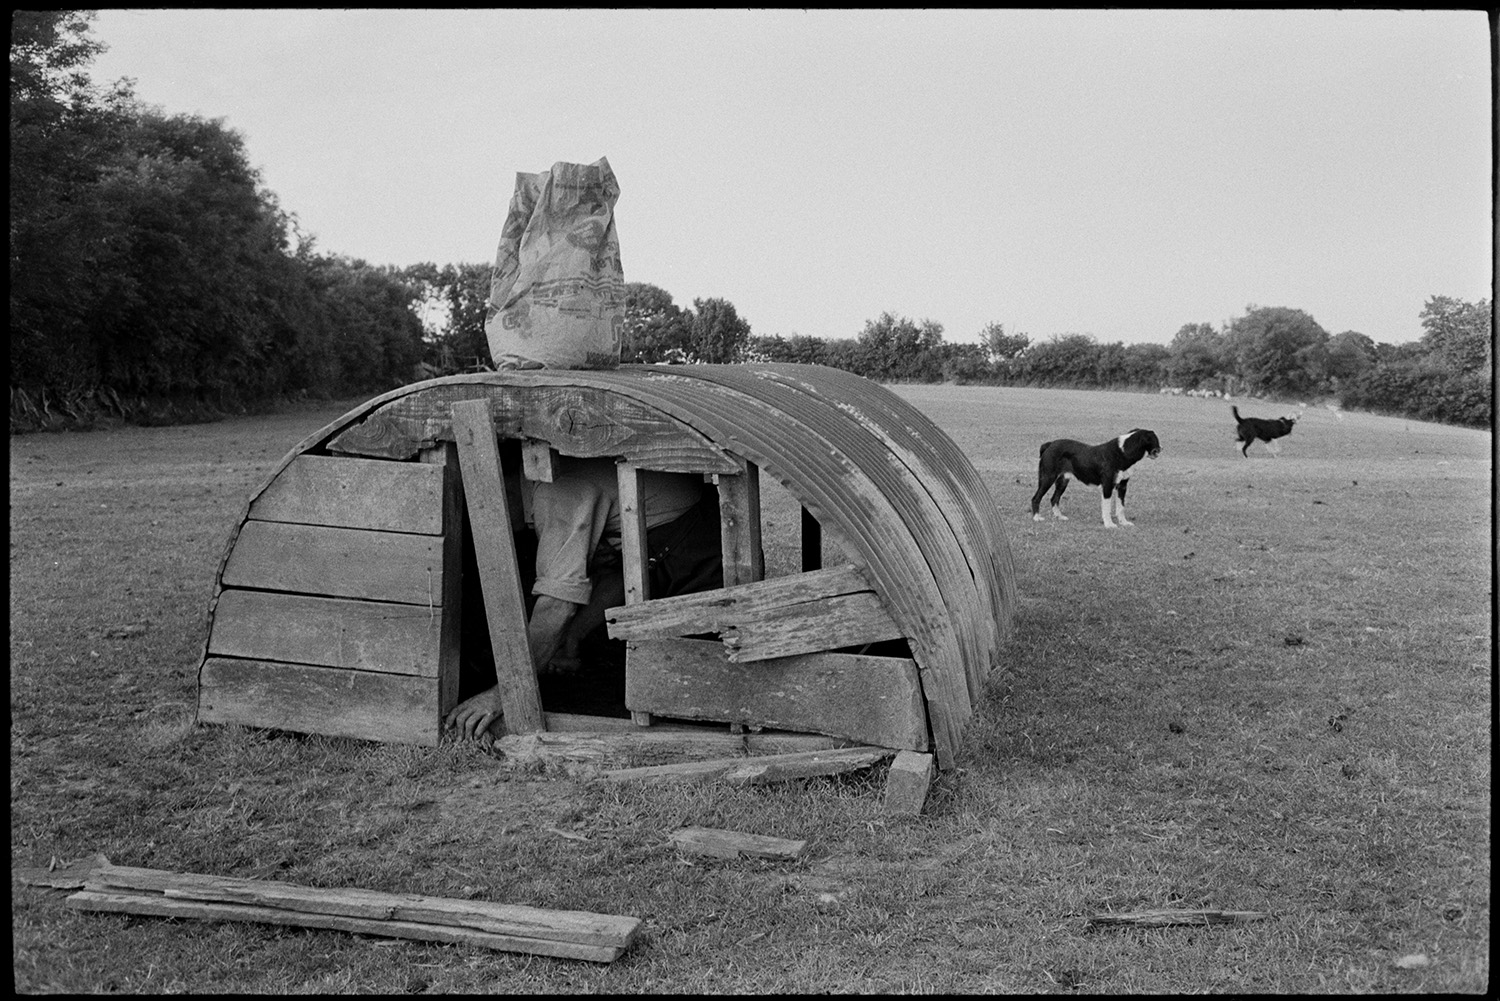 Farmer going to feed sheep walking past old machine mending bath as water trough.
[George Ayre repairing the wooden entrance to a corrugated iron shelter in a field at Ashwell, Dolton. Two dogs are in the background.]